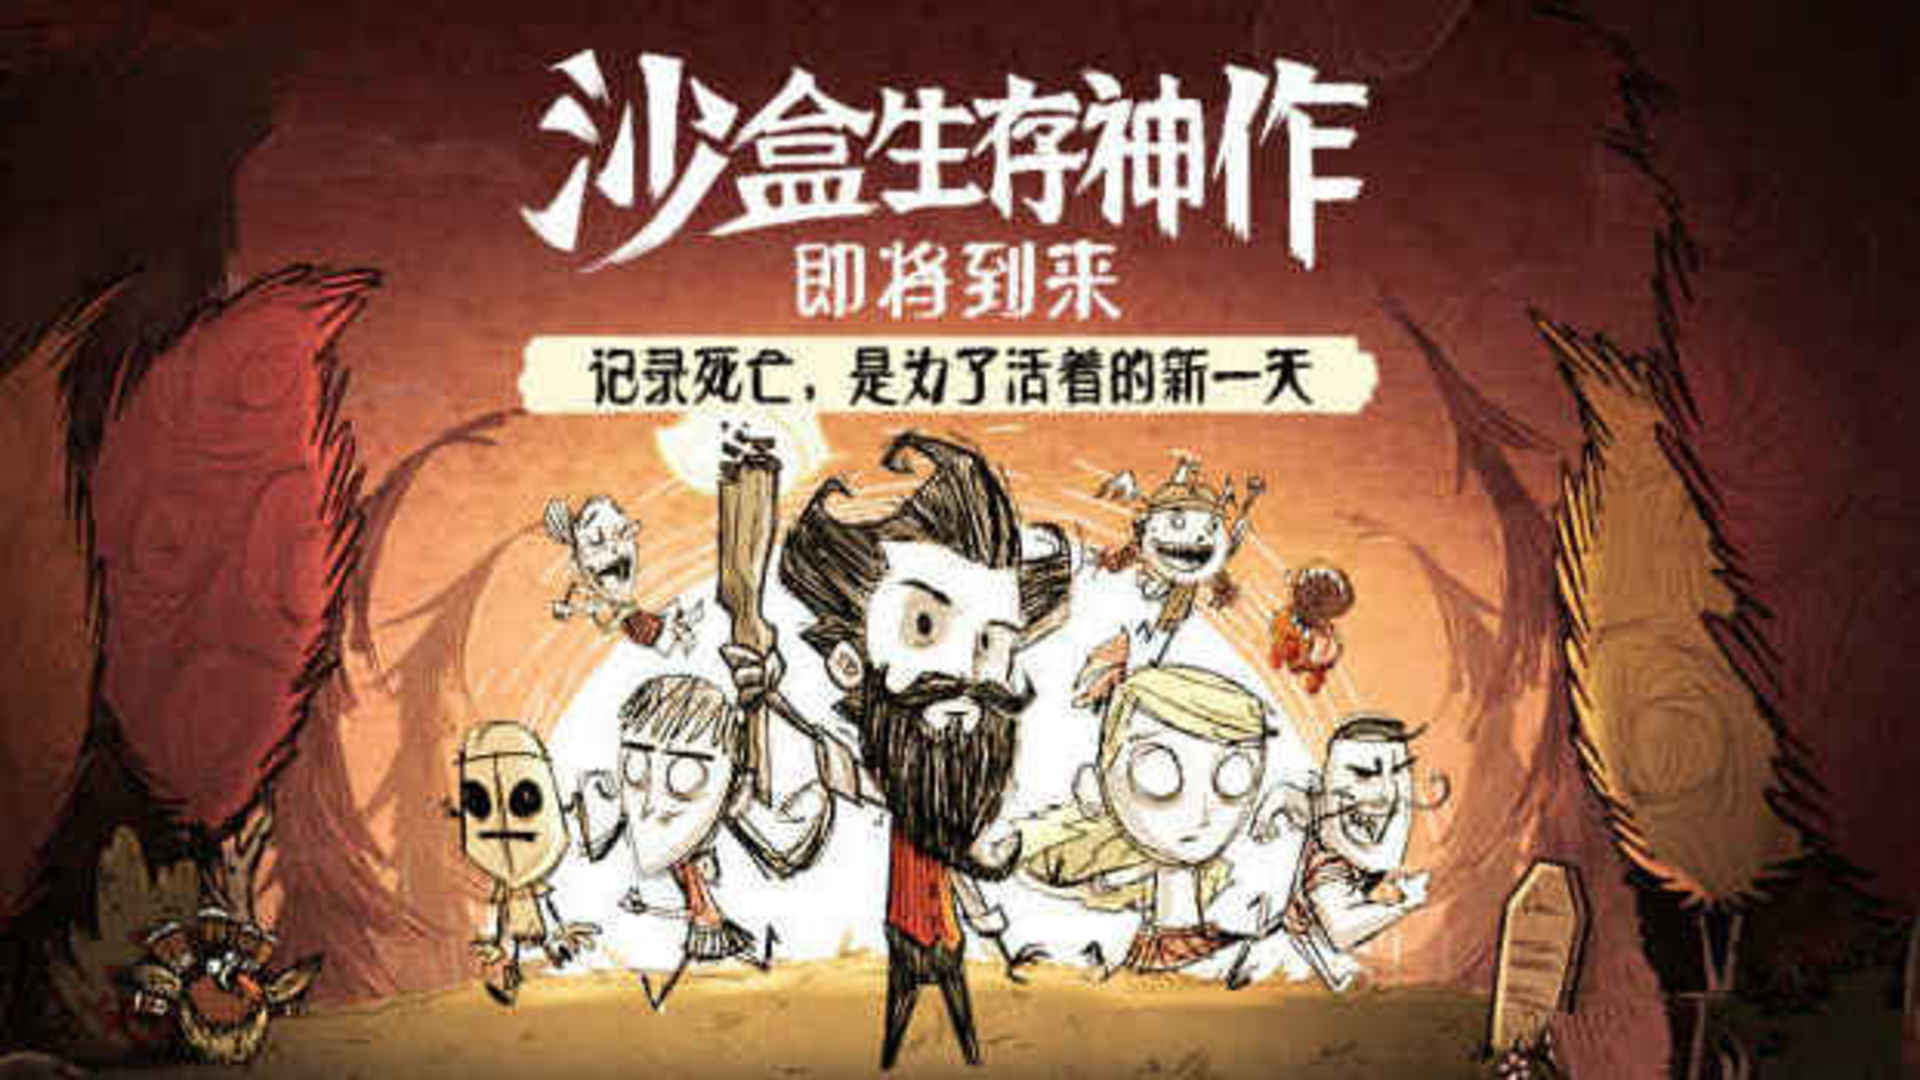 Banner of Don't Starve:토탈 에디션 